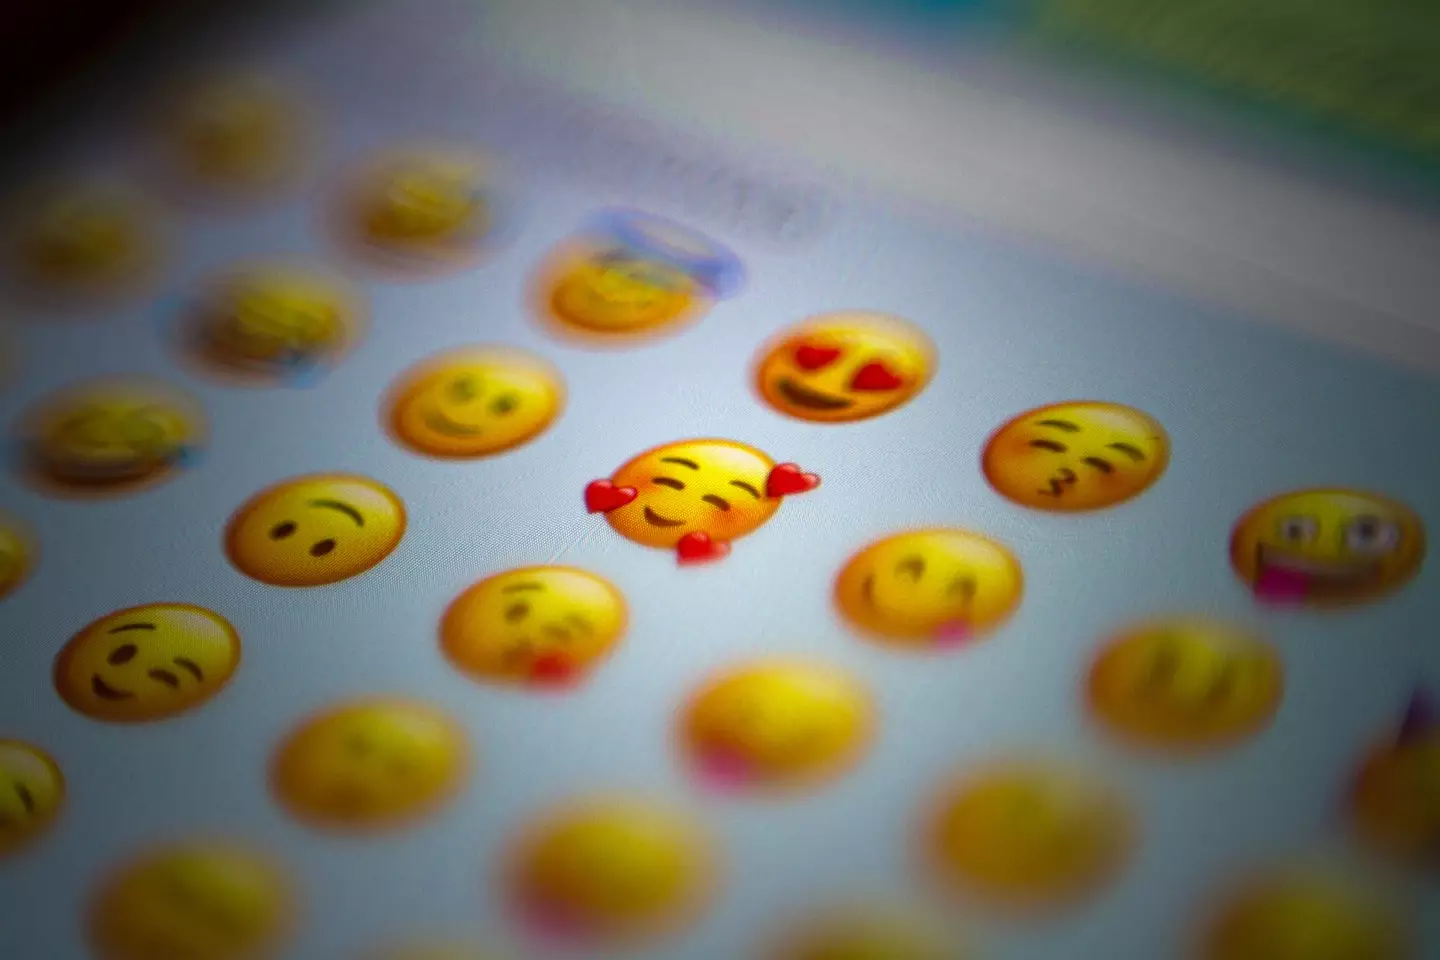 The legal expert warned we should all be careful about sending emojis.